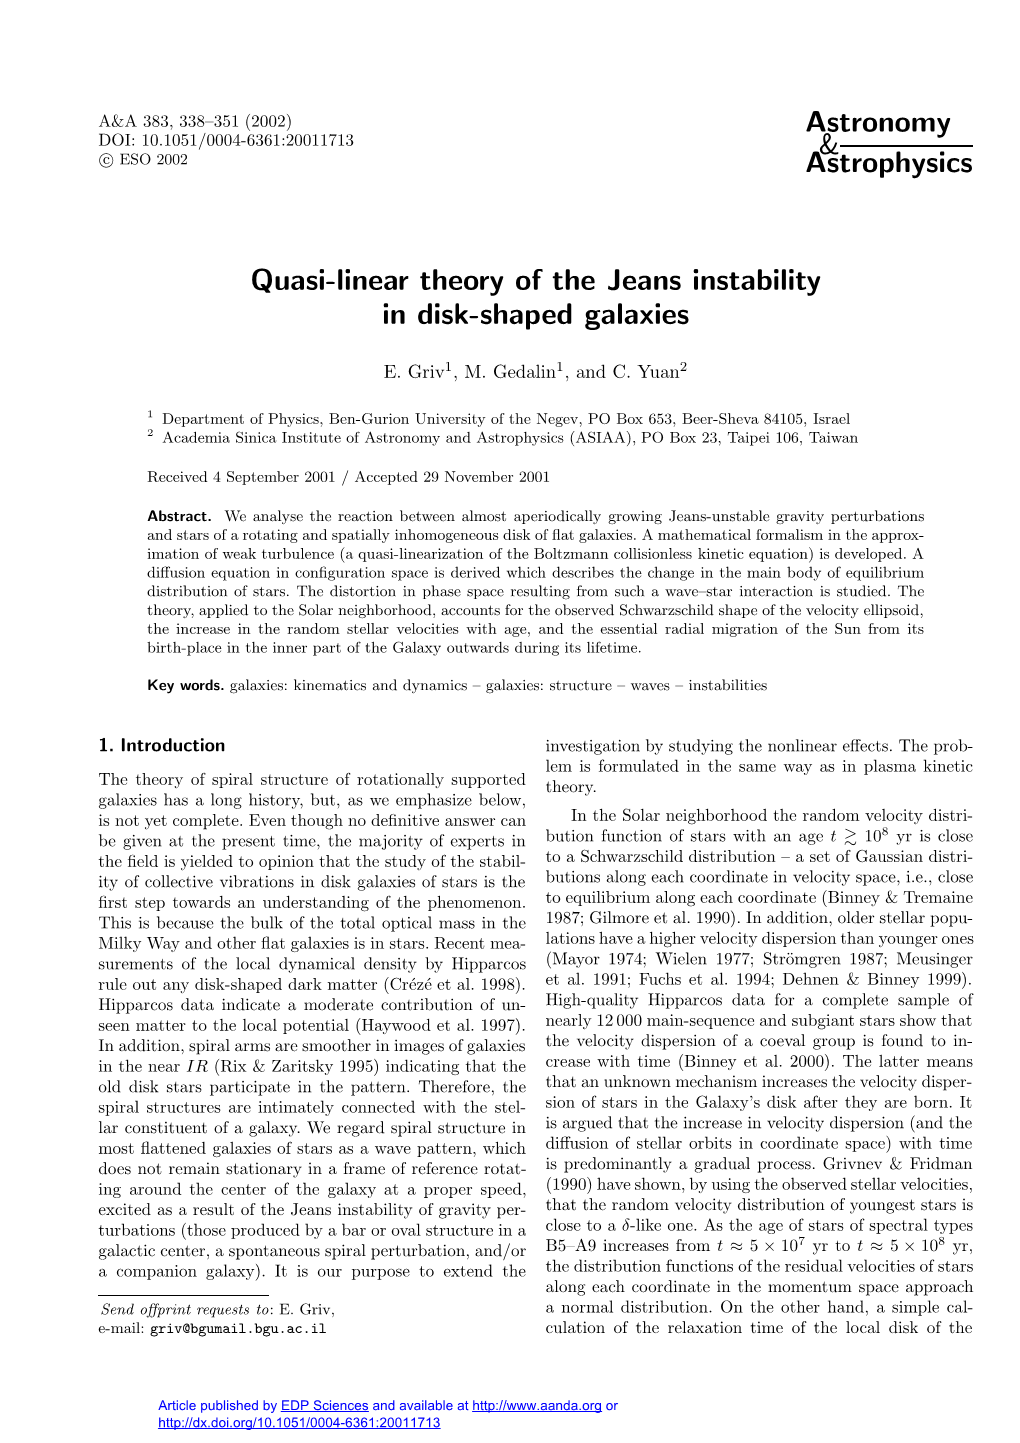 Quasi-Linear Theory of the Jeans Instability in Disk-Shaped Galaxies